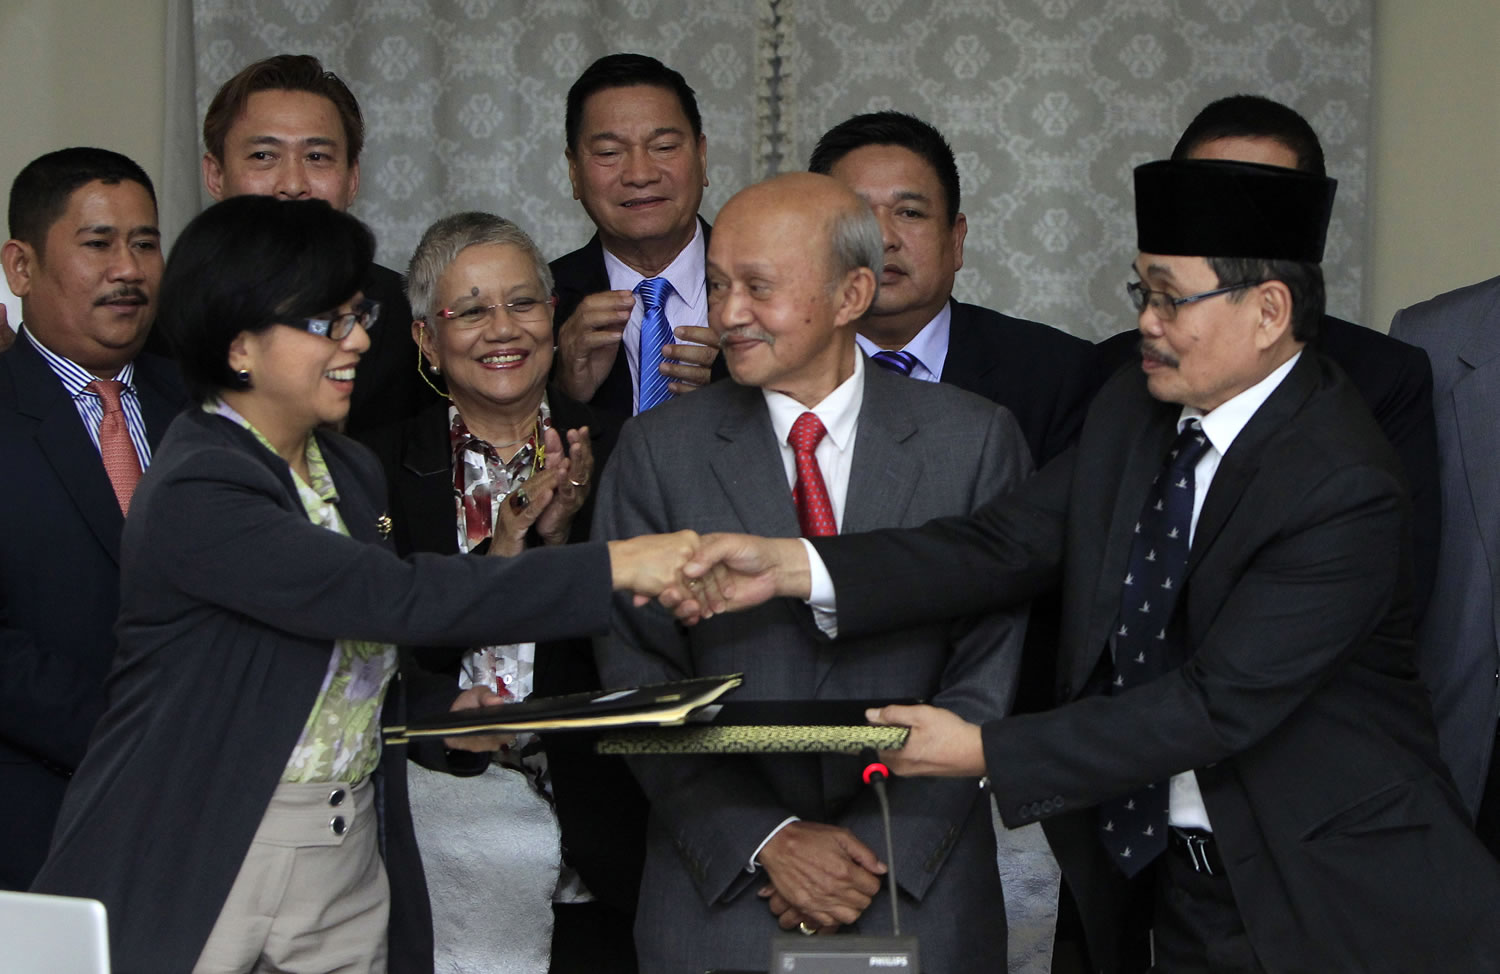 Miriam Coronel-Ferrer, front left, chairperson of Philippine Government Peace Panel, and Mohagher Iqbal, front right, chief negotiator for the Moro National Liberation Front, exchange signed documents Saturday as Malaysian facilitator Abdul Ghafar Tengku Mohamed, front center, witnesses after the 43rd GPH-MILF Exploratory Talks in Kuala Lumpur, Malaysia.